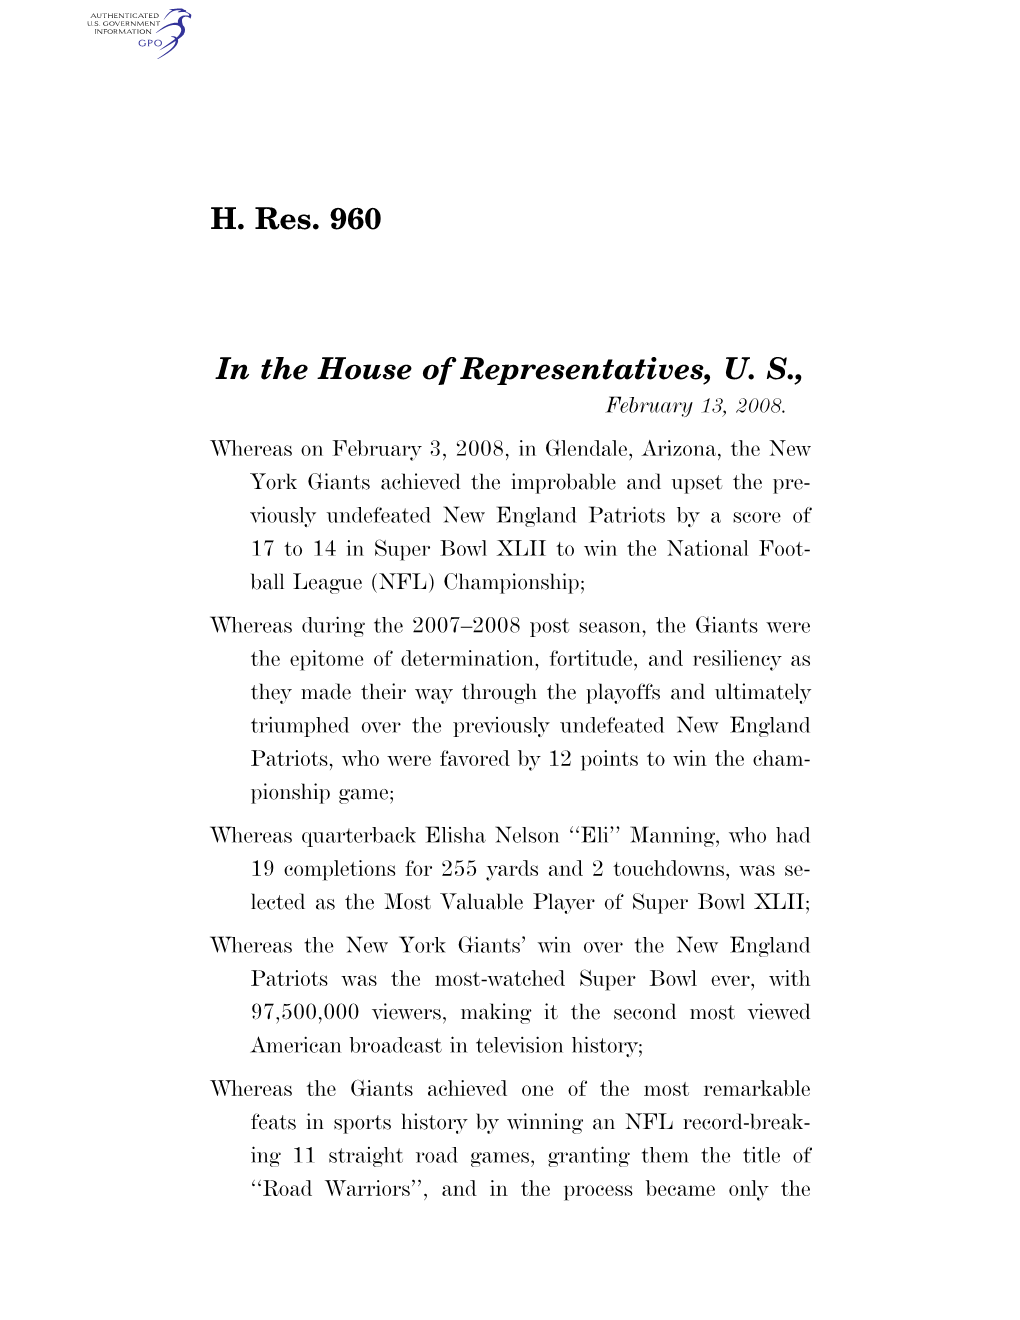 H. Res. 960 in the House of Representatives, U